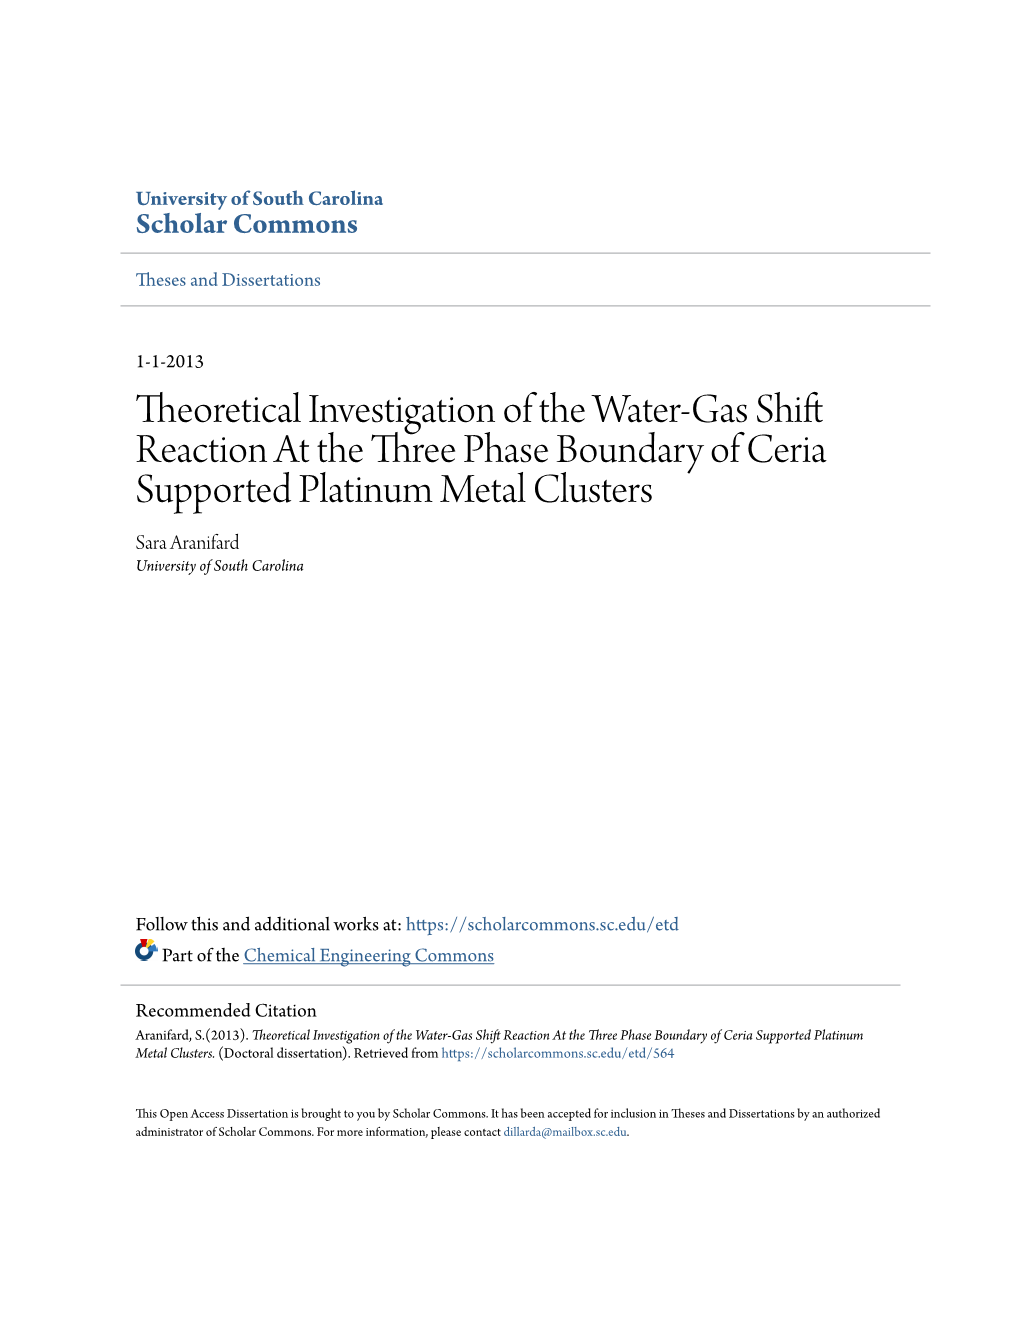 Theoretical Investigation of the Water-Gas Shift Reaction at The